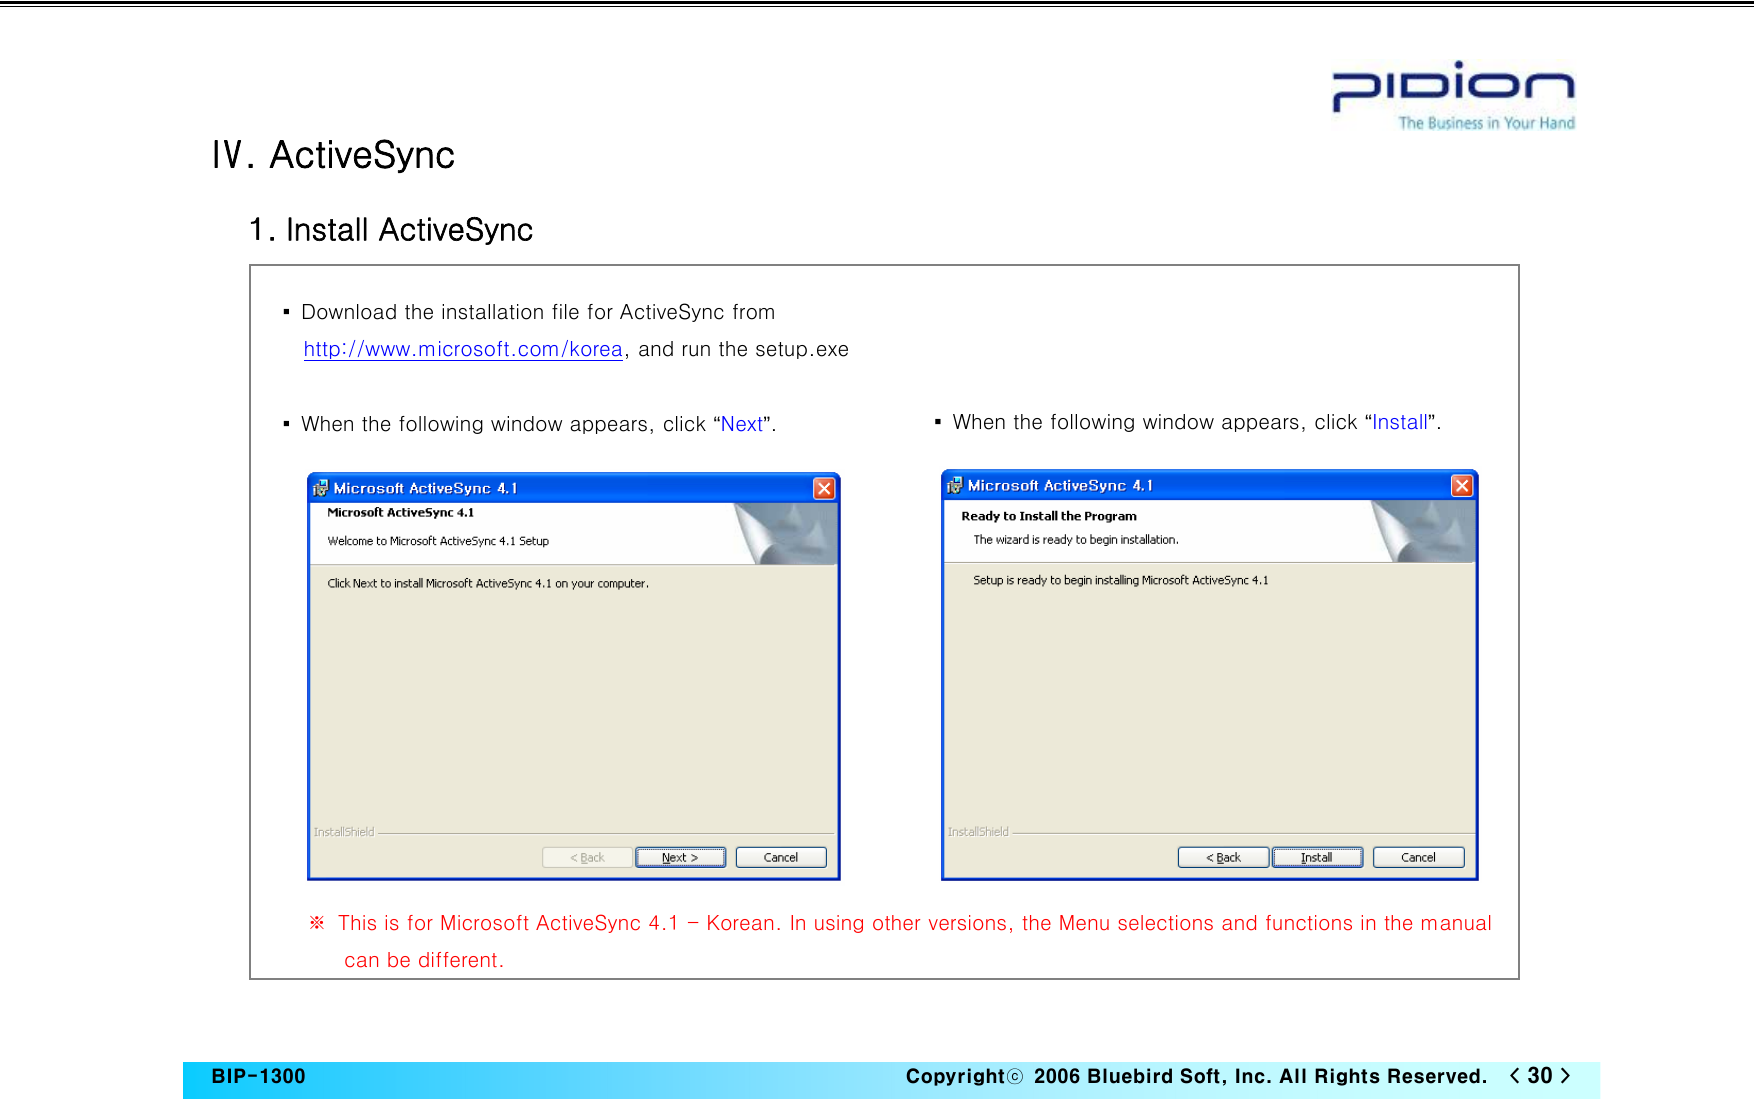   BIP-1300                                                                   Copyrightⓒ  2006 Bluebird Soft, Inc. All Rights Reserved.   &lt; 30 &gt;    Ⅳ. ActiveSync   1. Install ActiveSync                  ※  This is for Microsoft ActiveSync 4.1 - Korean. In using other versions, the Menu selections and functions in the manual can be different. ▪  Download the installation file for ActiveSync from http://www.microsoft.com/korea, and run the setup.exe  ▪  When the following window appears, click “Next”.  ▪  When the following window appears, click “Install”. 